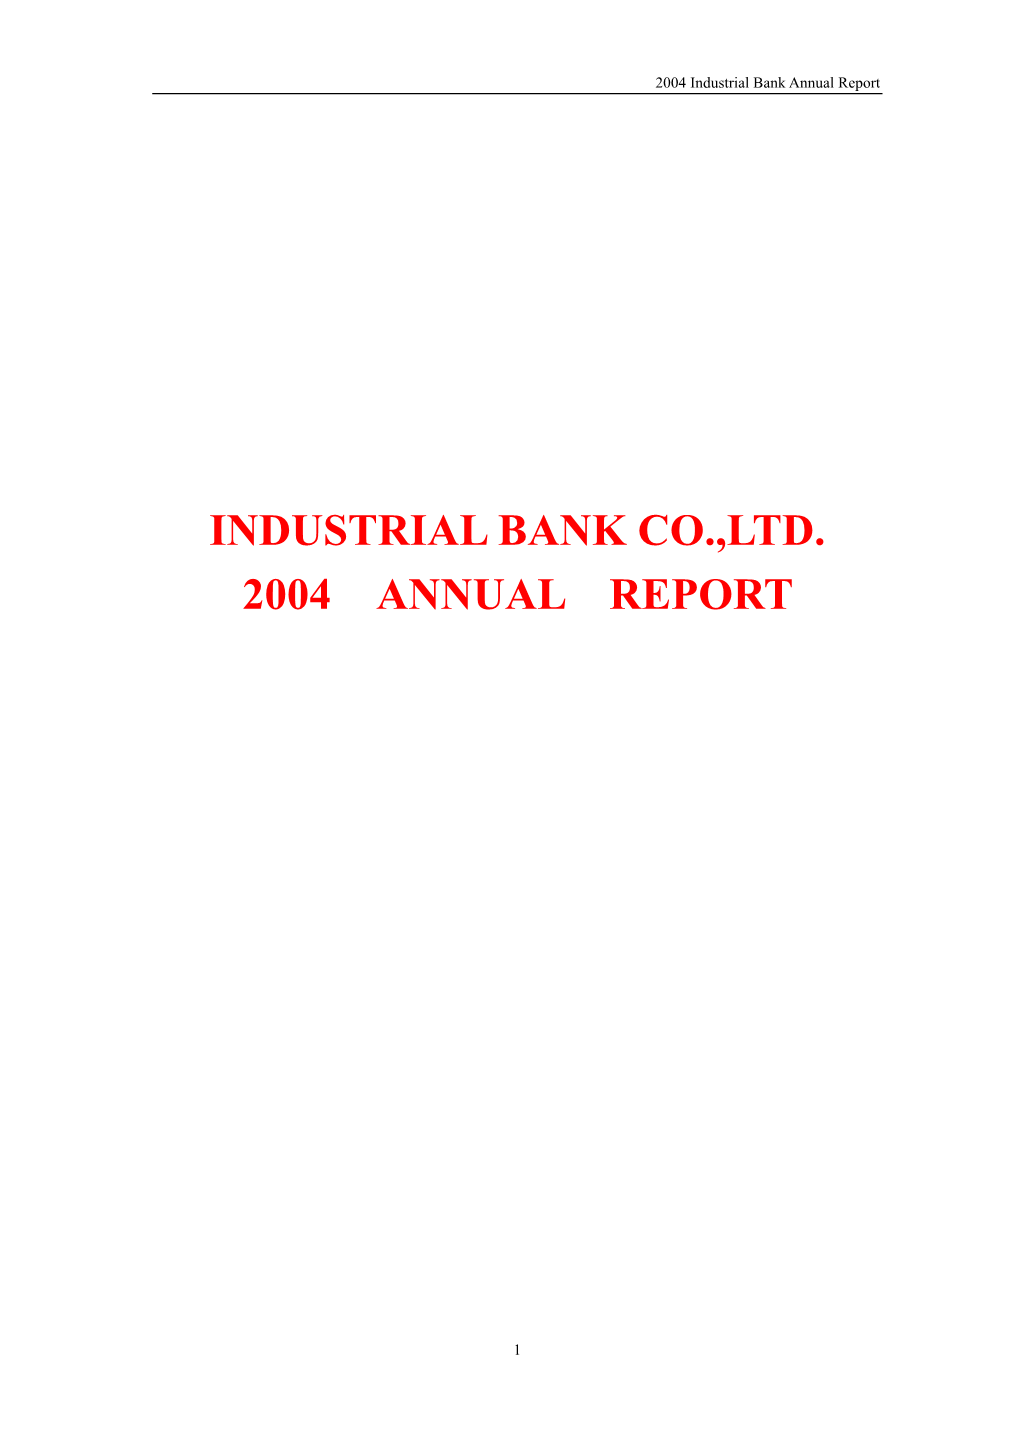 Industrial Bank Co.,Ltd. 2004 Annual Report